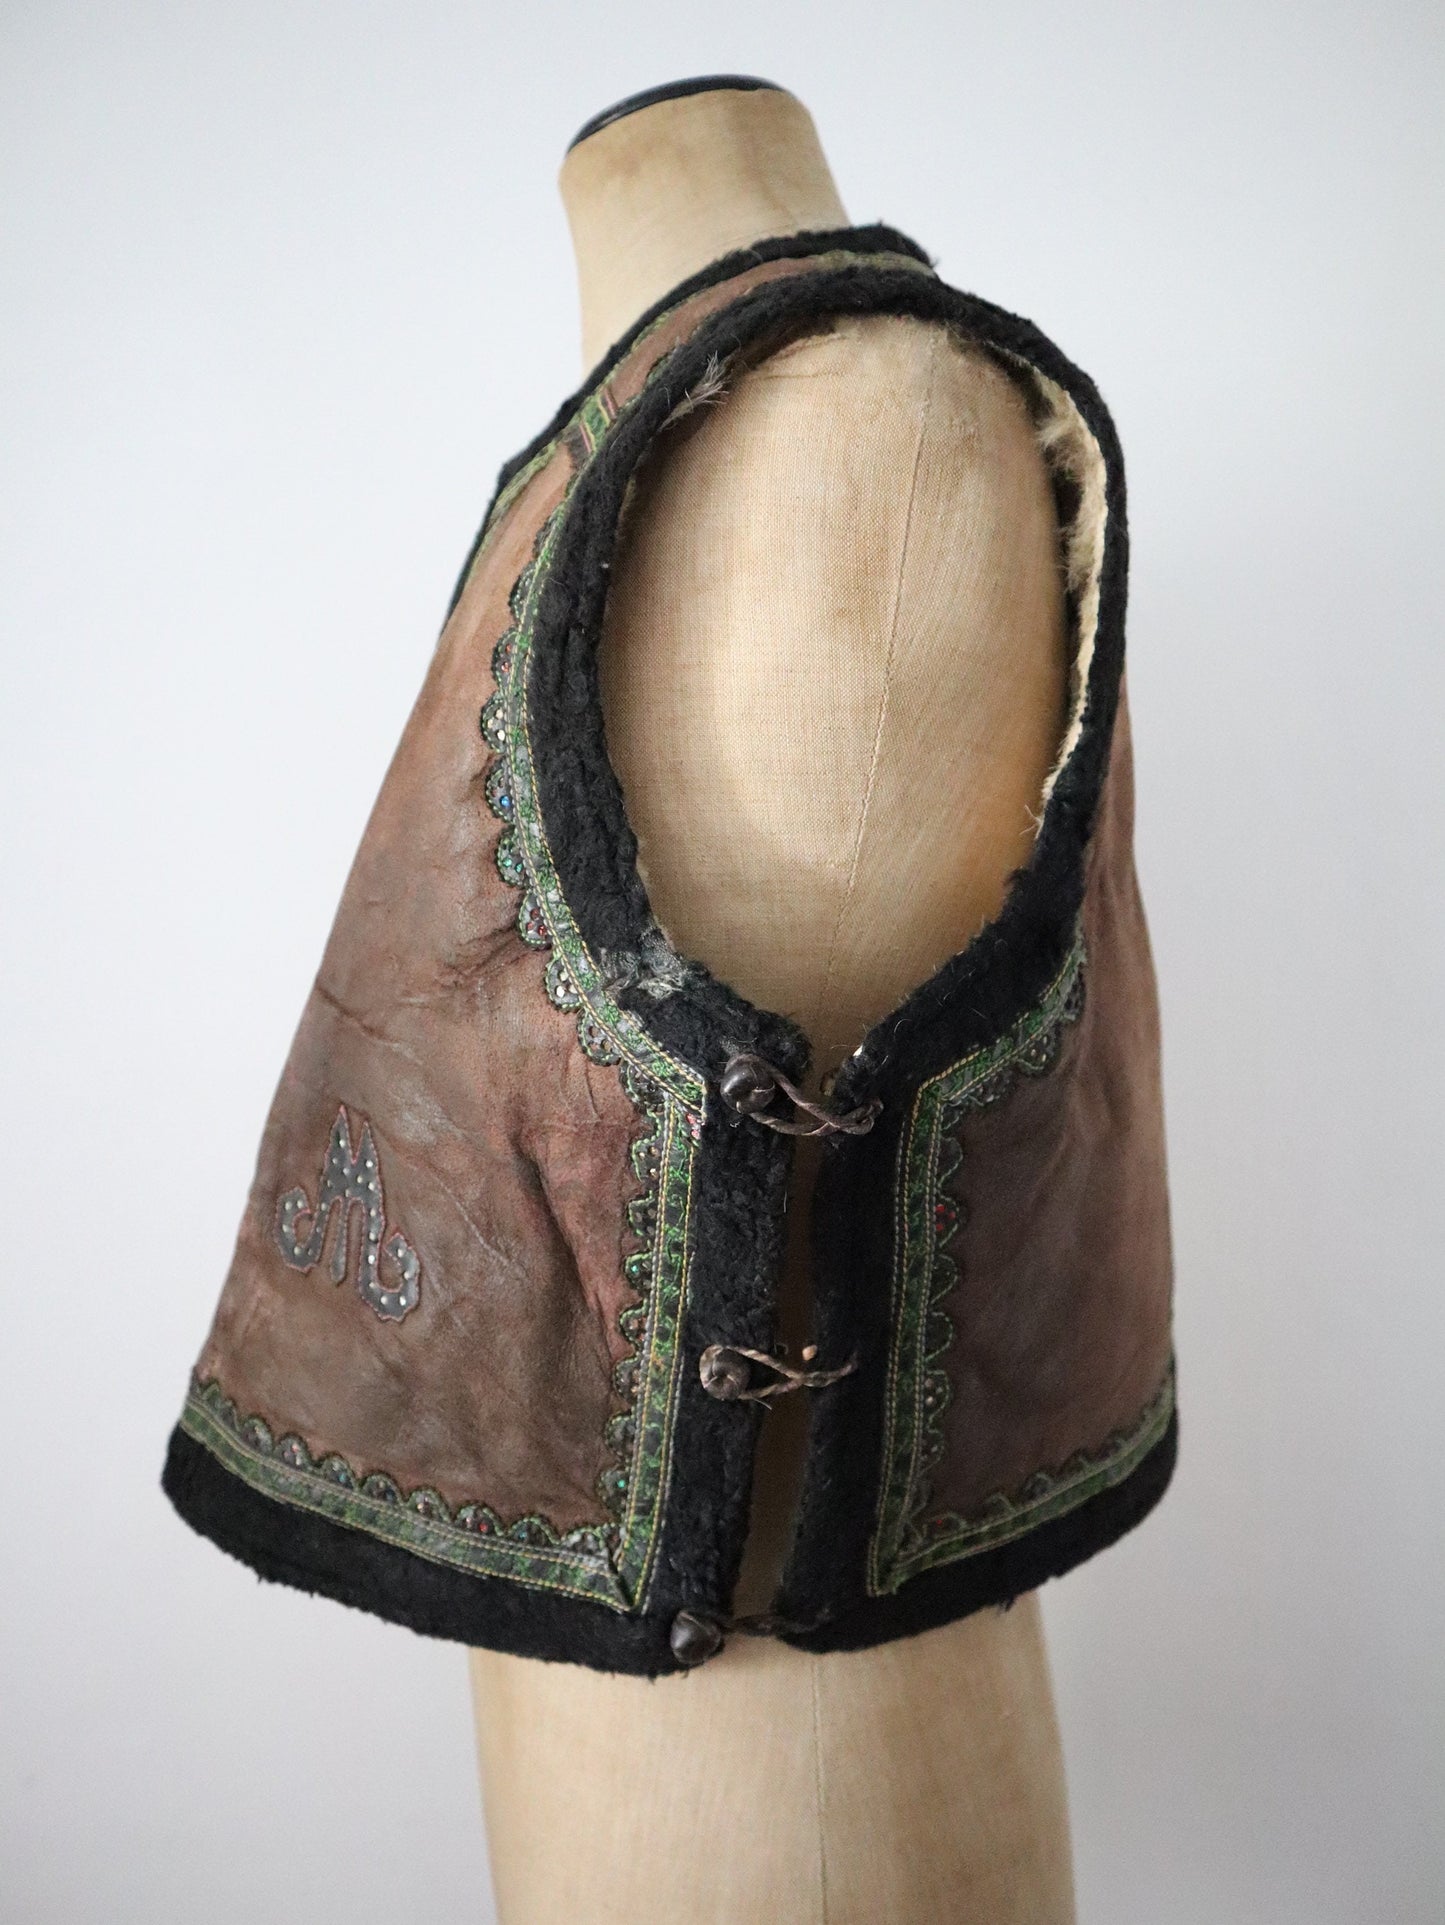 1920s Hungarian sheepskin leather vest waistcoat embroidered tooled brown green Eastern European